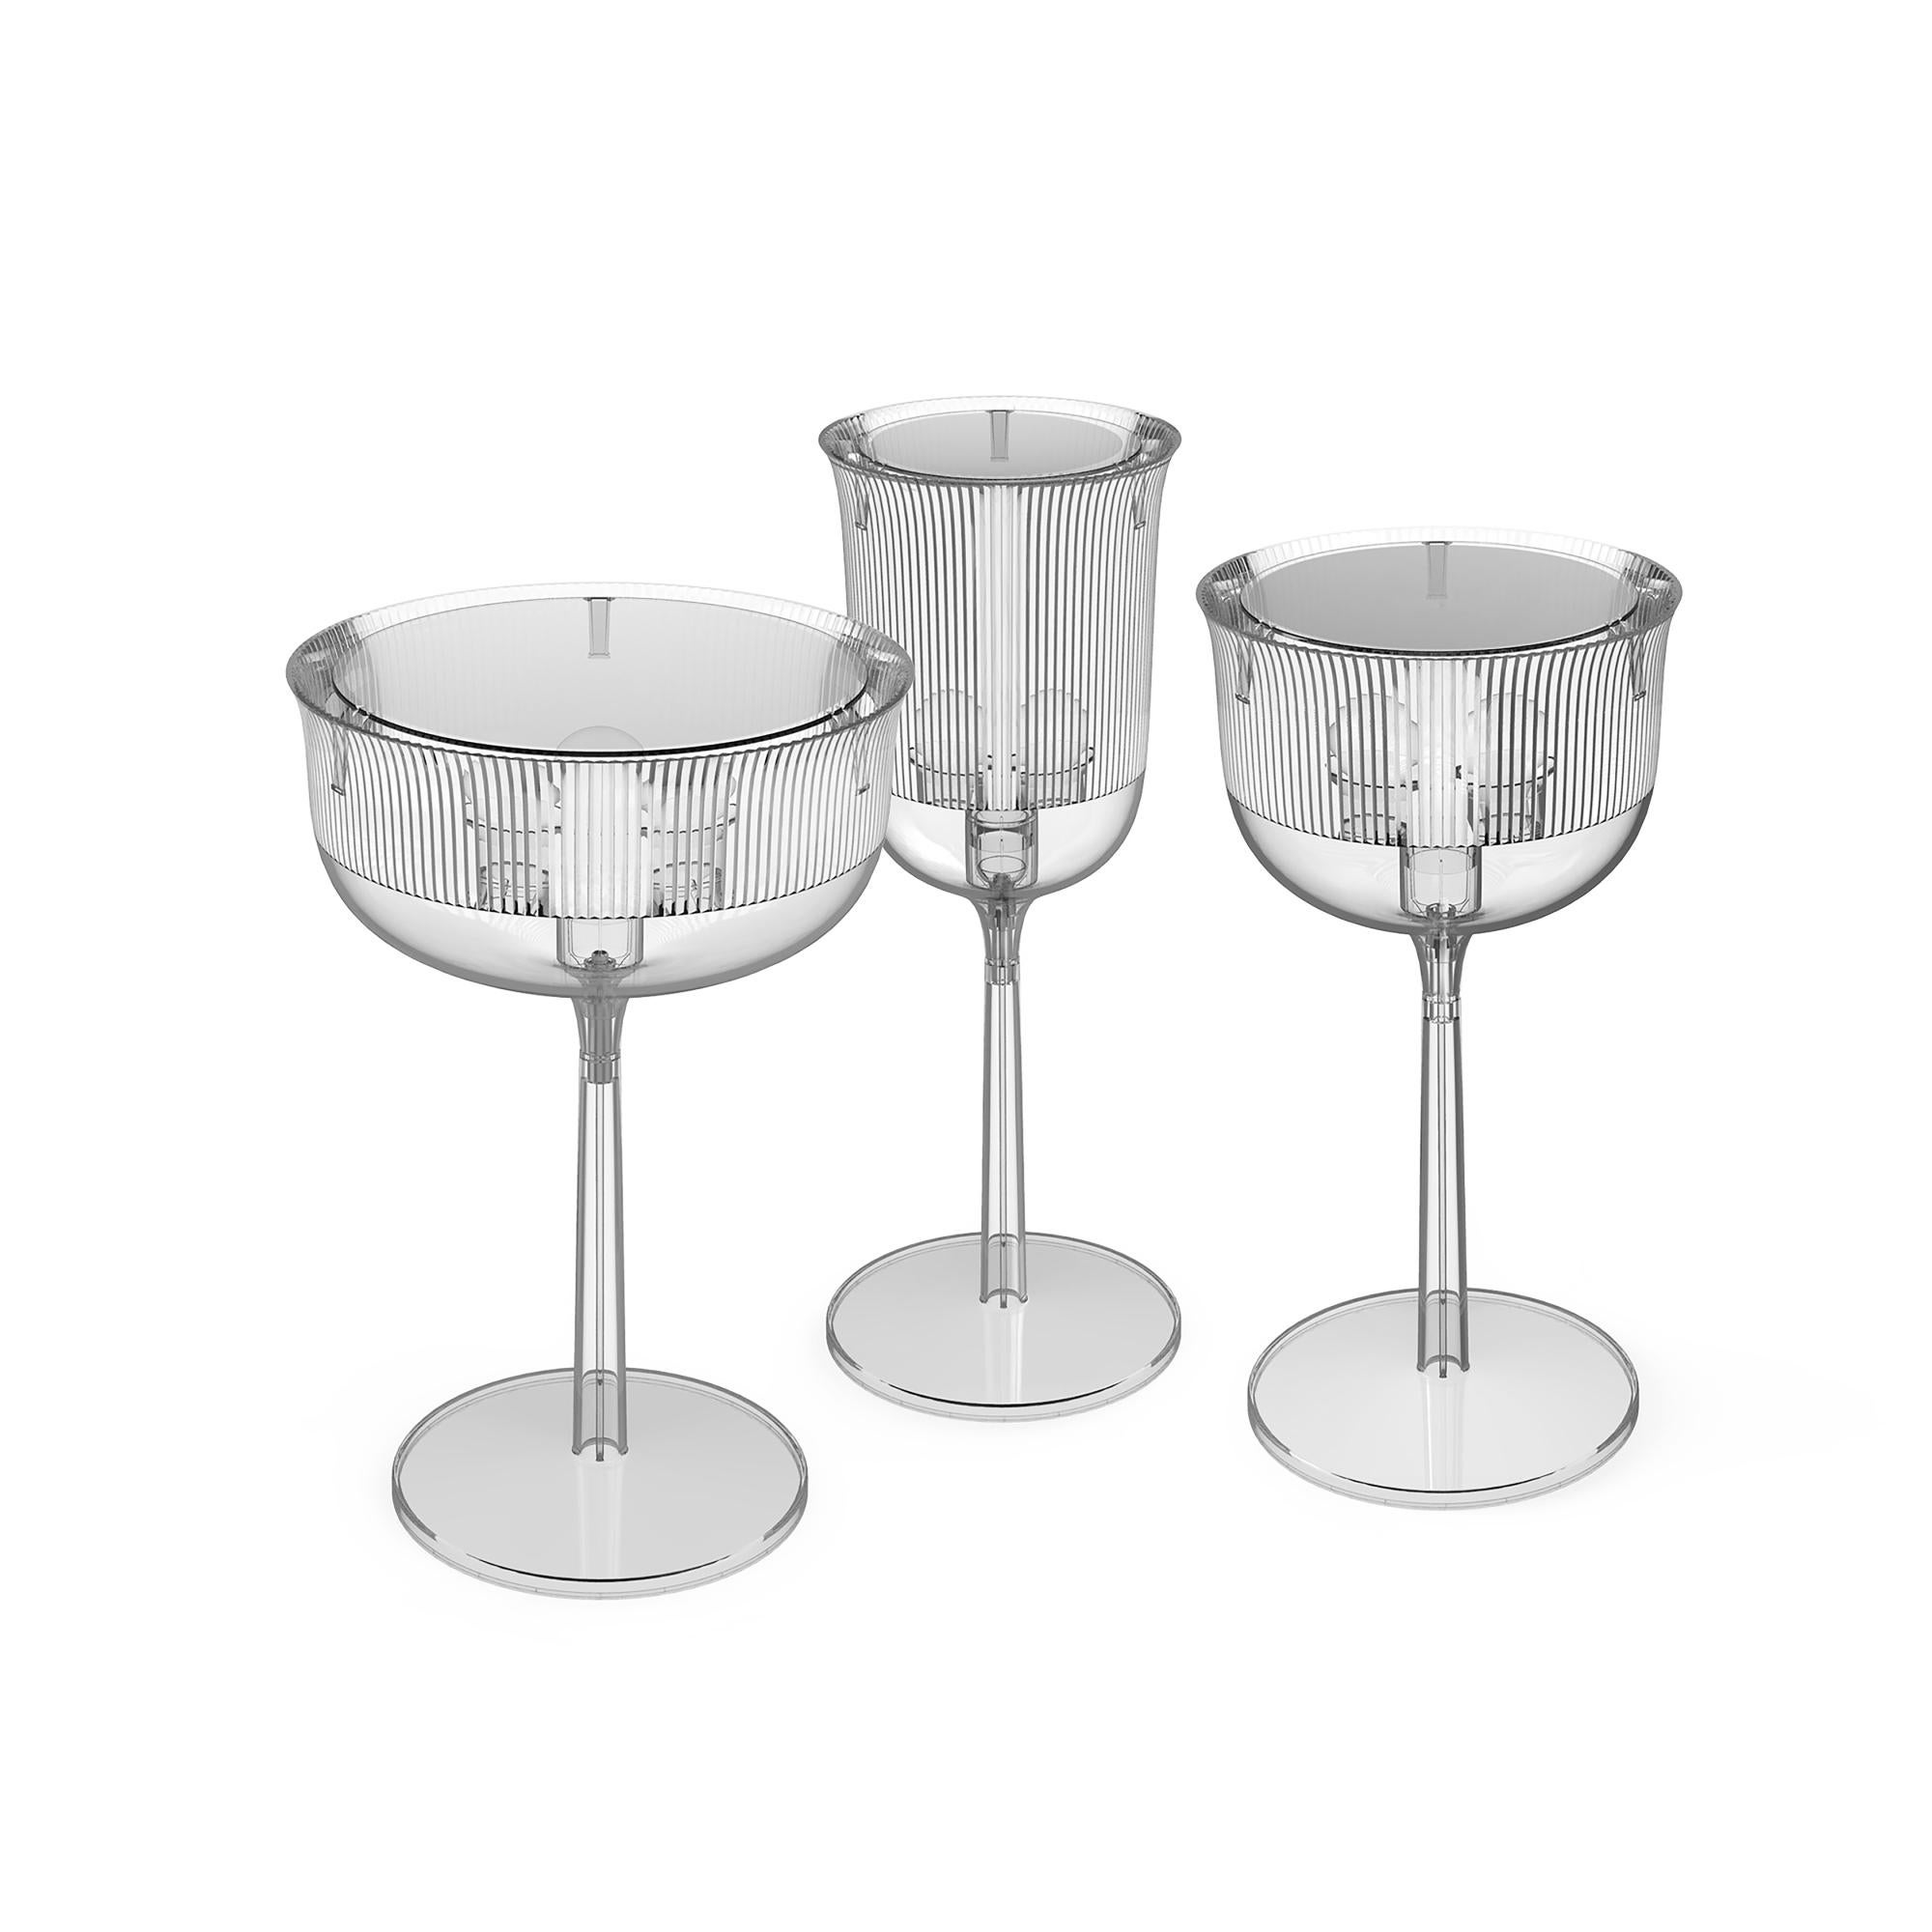 Goblets are the perfect cheers for your everyday space. The classic crystal glass, taken out from its original scale, acquires a new functionality, becoming a fine table lamp in three different shapes looking like a champagne flute, a goblet and a